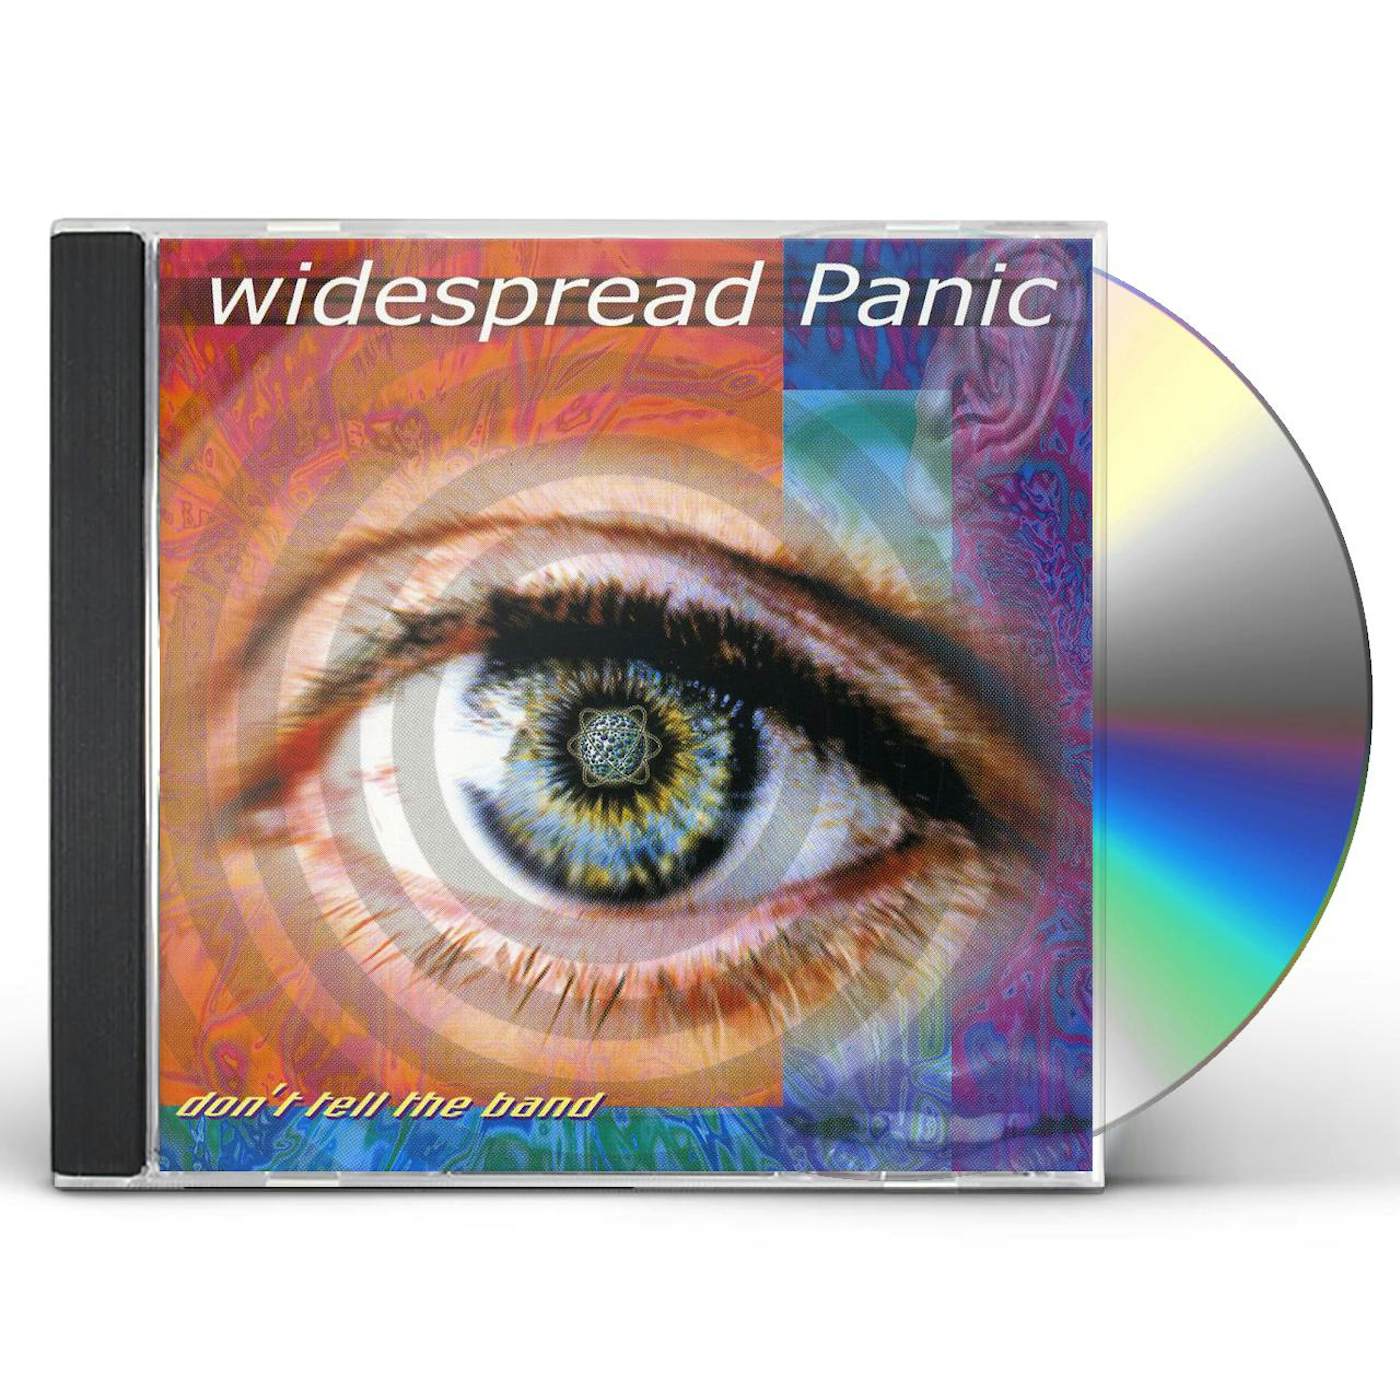 Widespread Panic DON'T TELL THE BAND CD